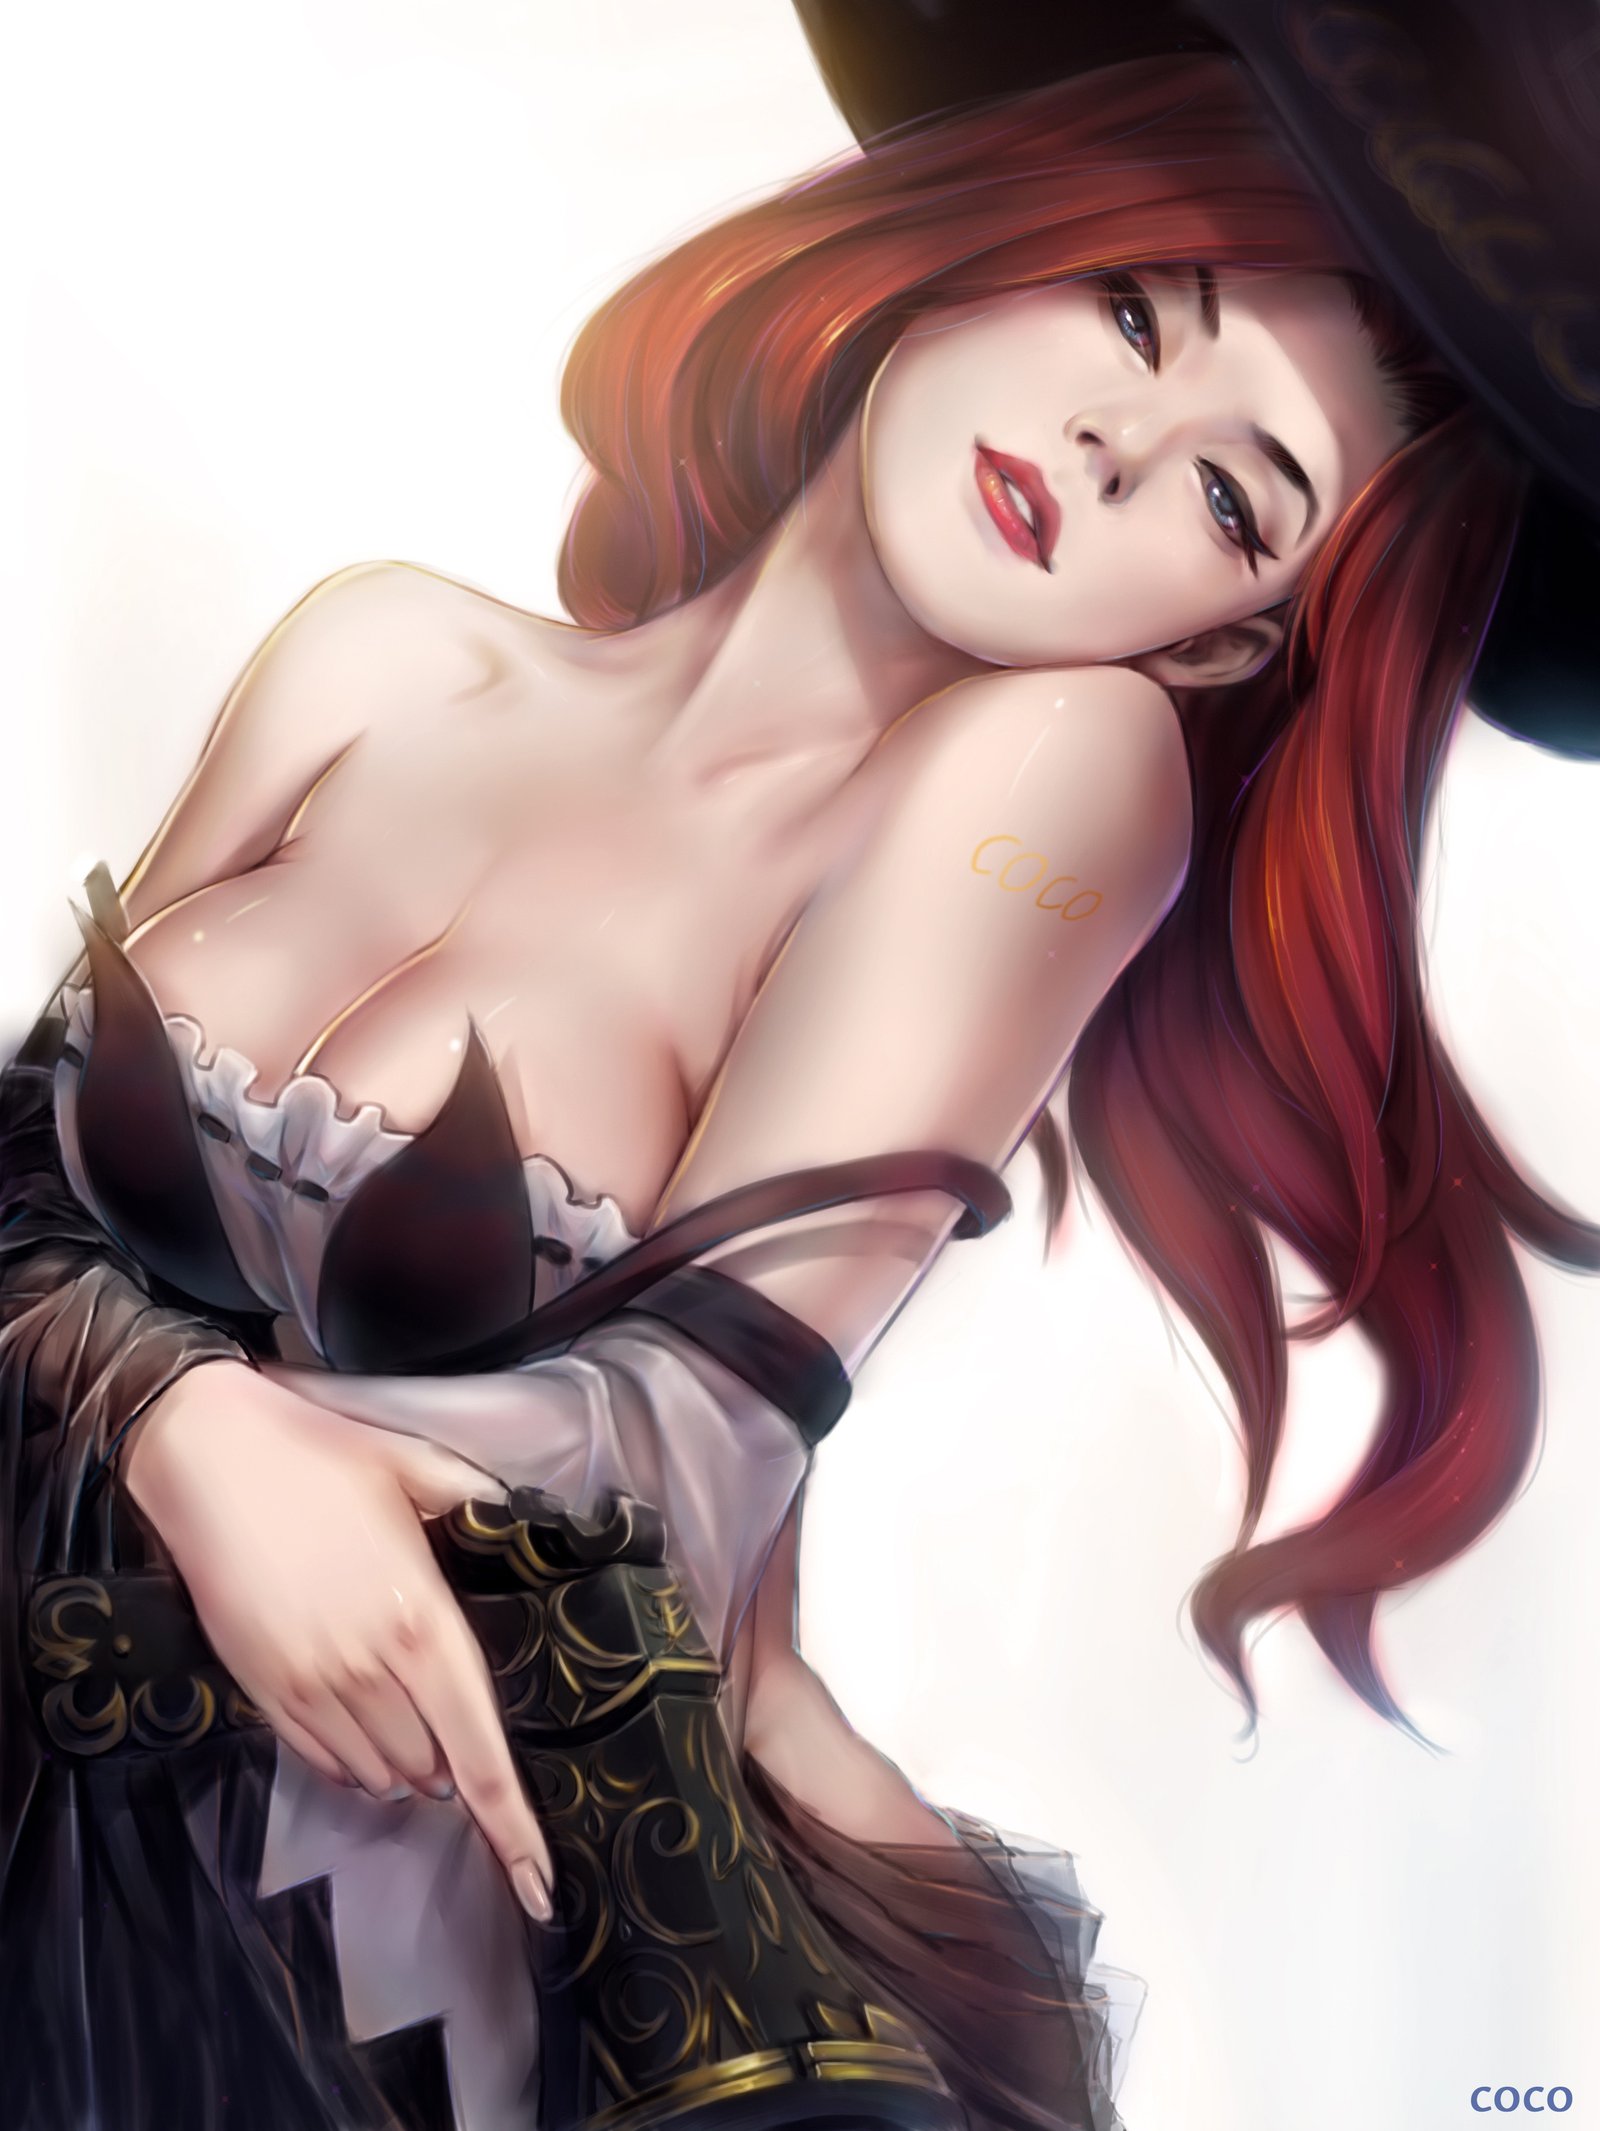 Miss Fortune Wallpapers And Fan Arts League Of Legends Lol Stats